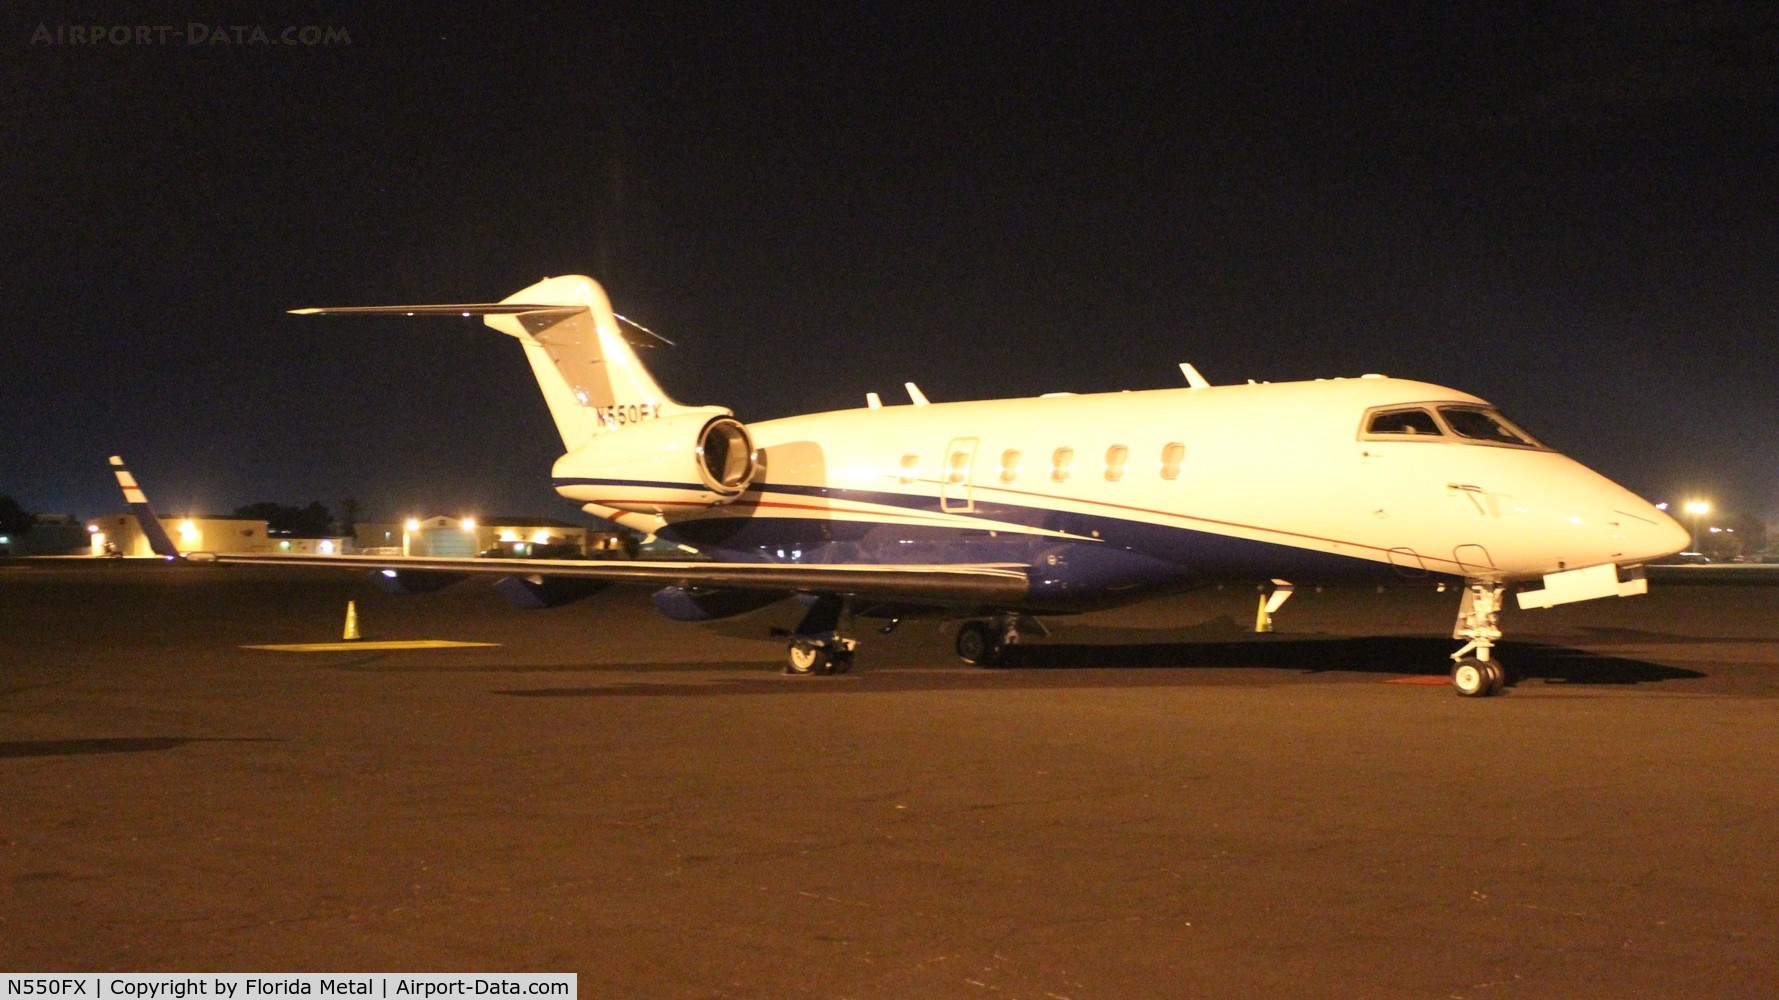 N550FX, 2013 Bombardier Challenger 300 (BD-100-1A10) C/N 20391, Challenger 300